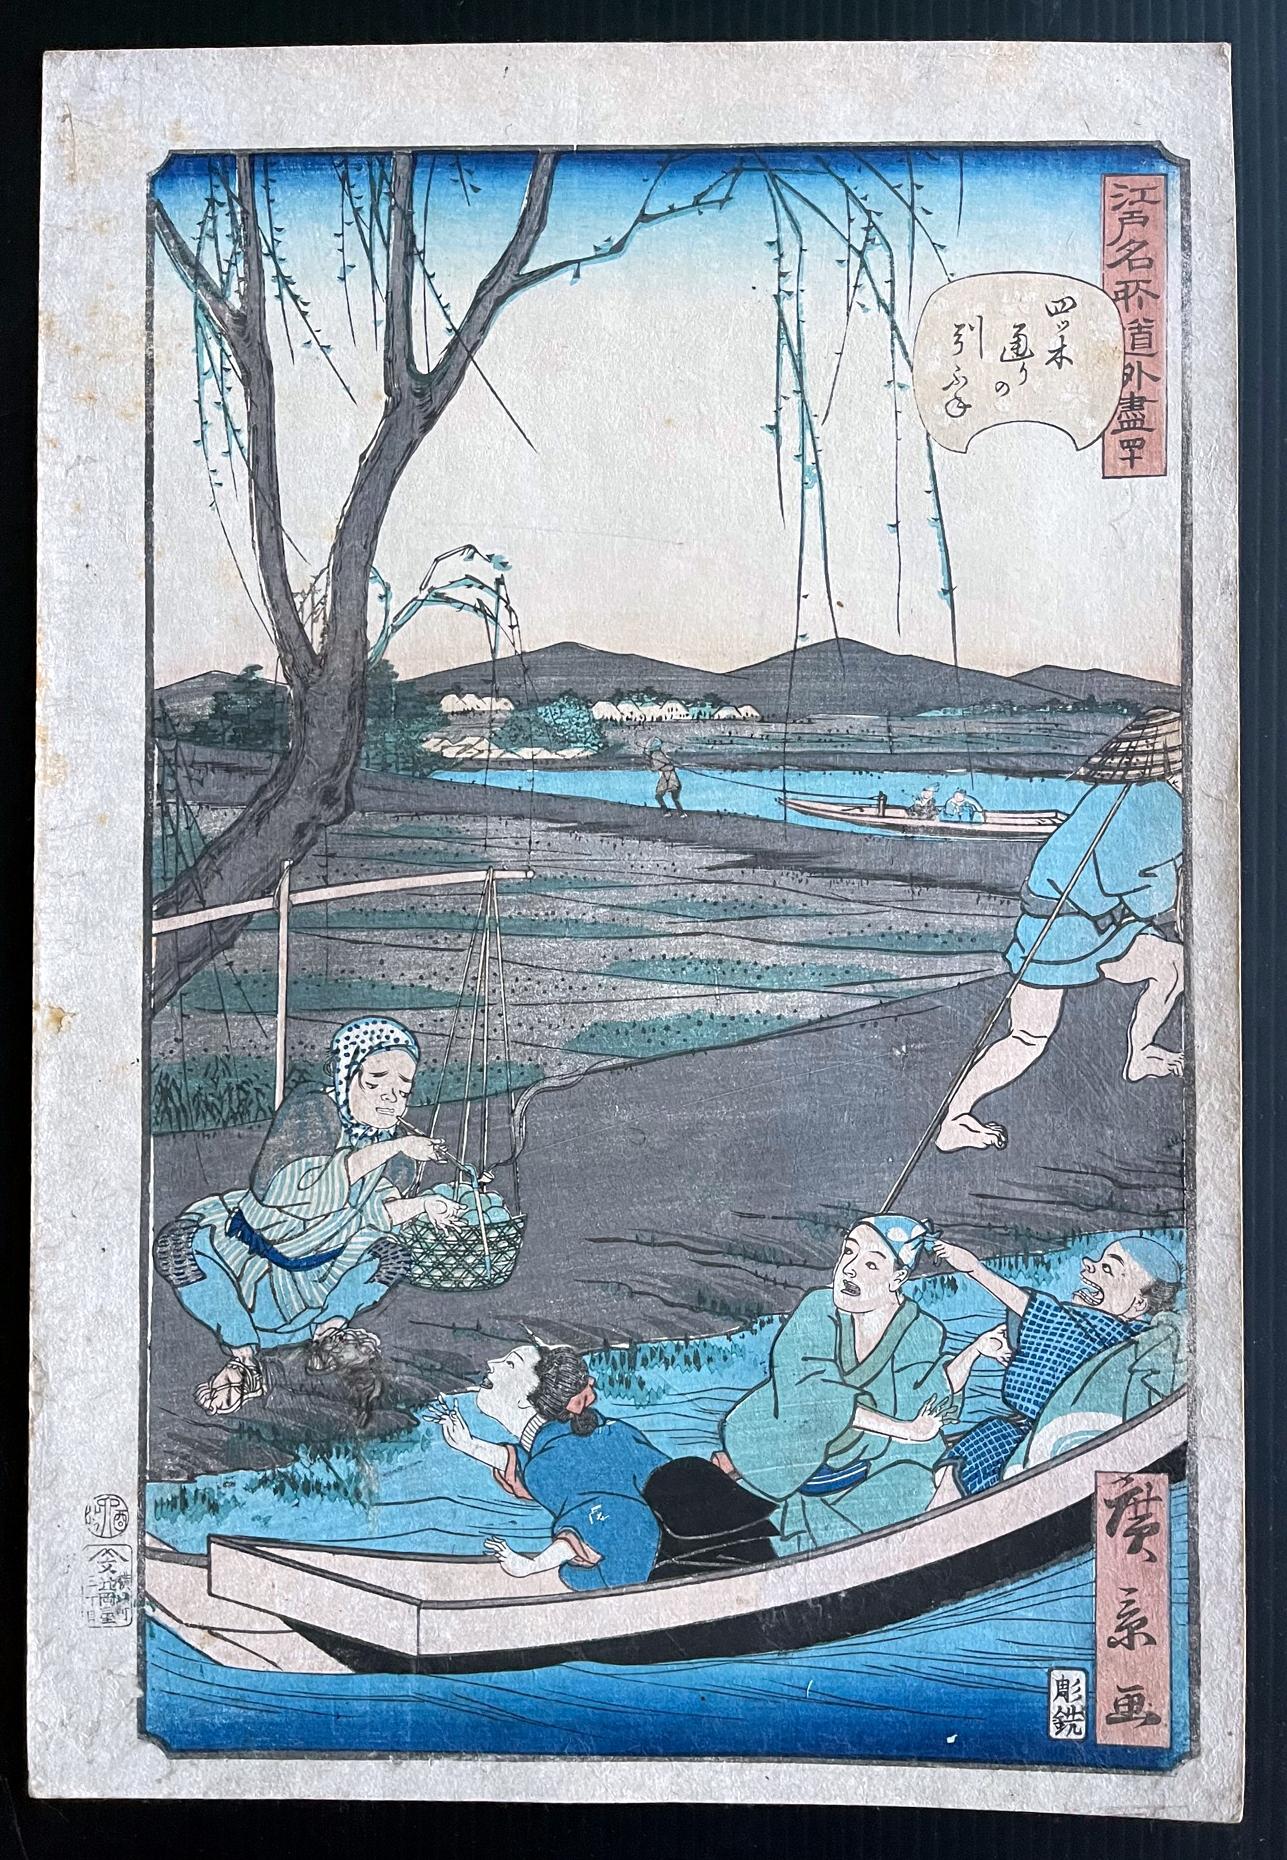 Artist: Utagawa Hirokage (active 1855-1865)
Series: Comical Views of Famous Places in Edo
Number: 40 